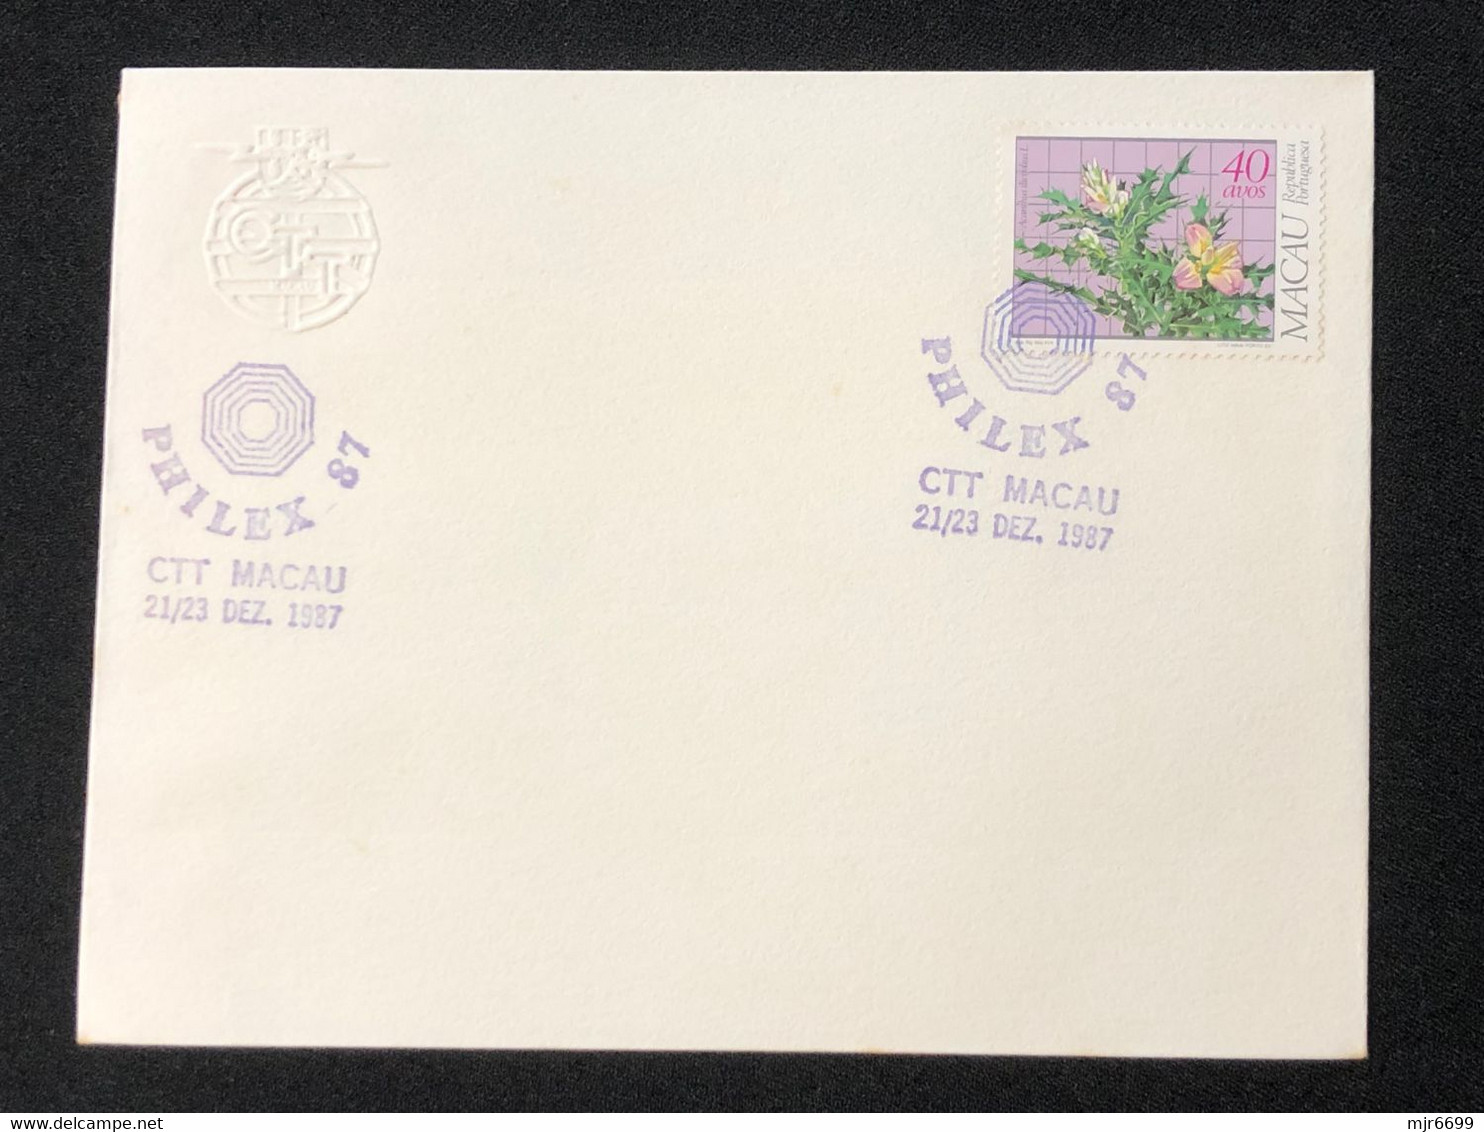 MACAU "PHILEX 87" STAMP EXHIBATION COMMEMORATIVE CANCELLATION ON COVER - Covers & Documents